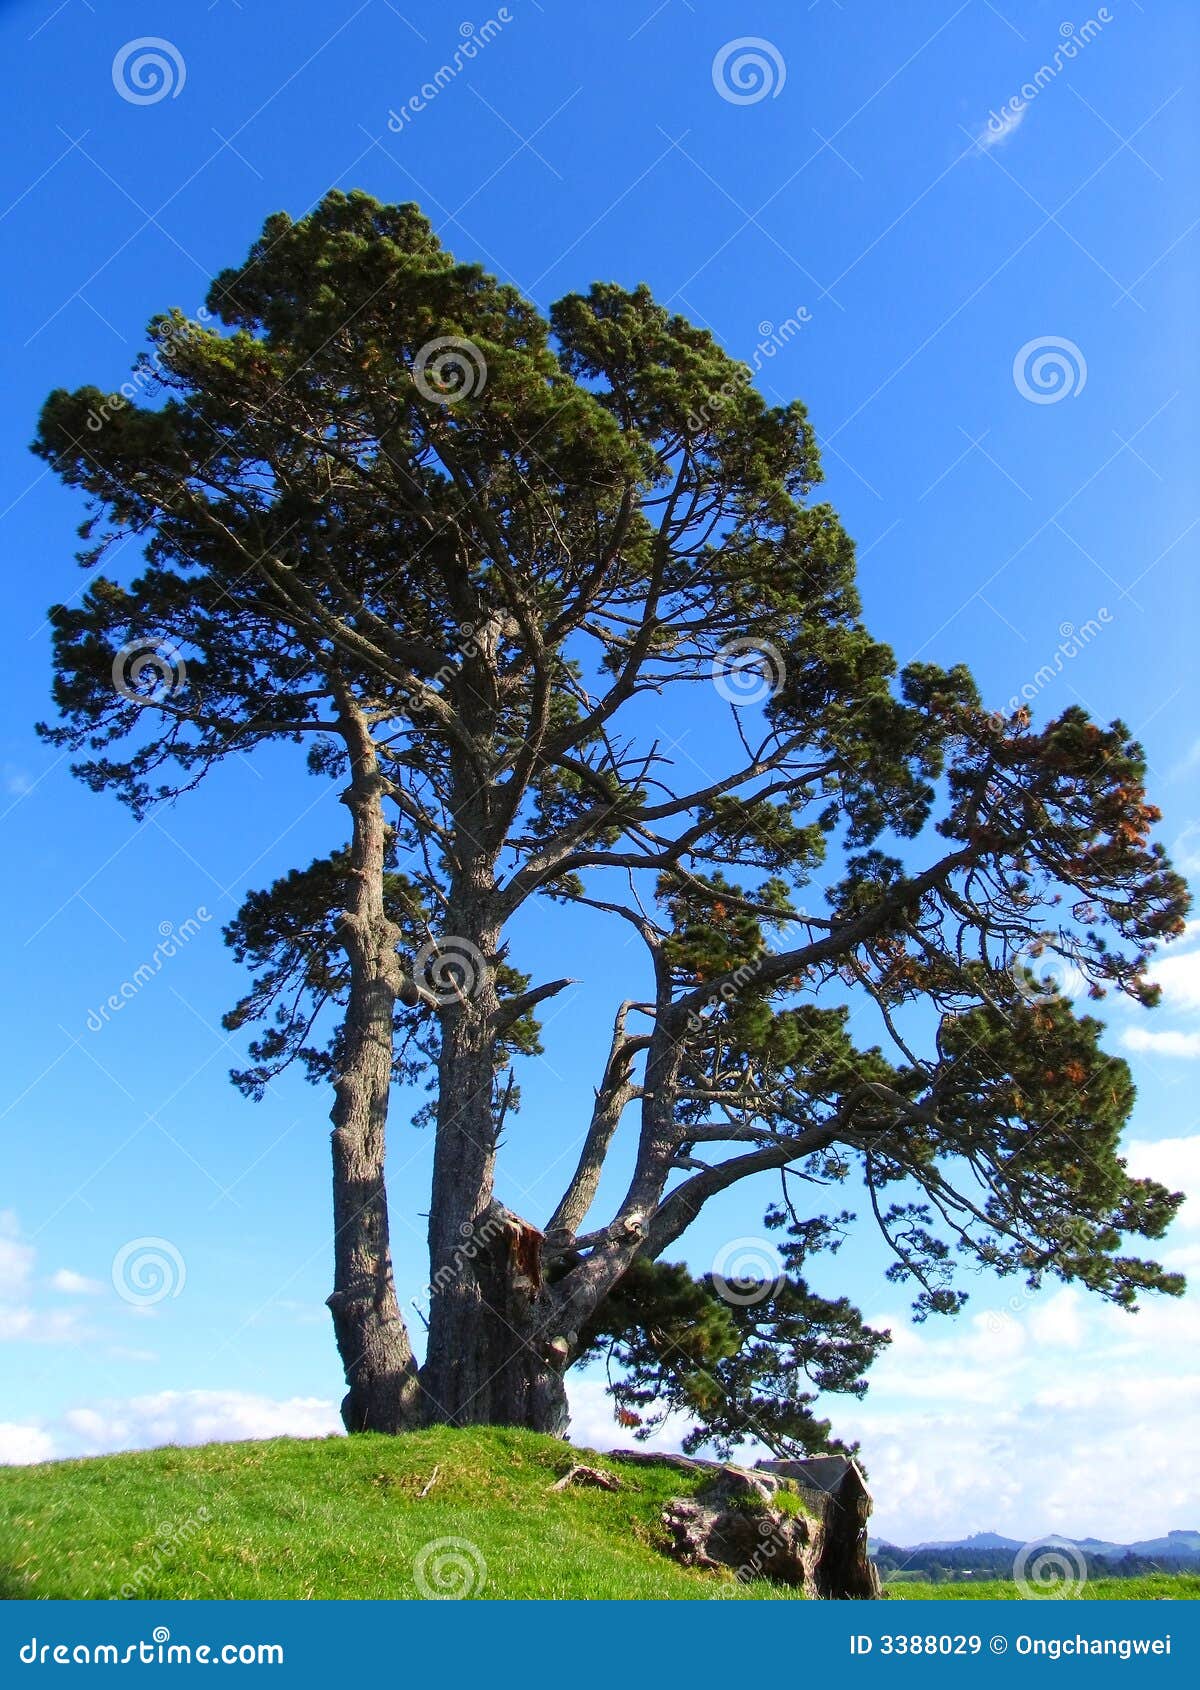 tree in papamoa hills cultural heritage regional park, new zealand